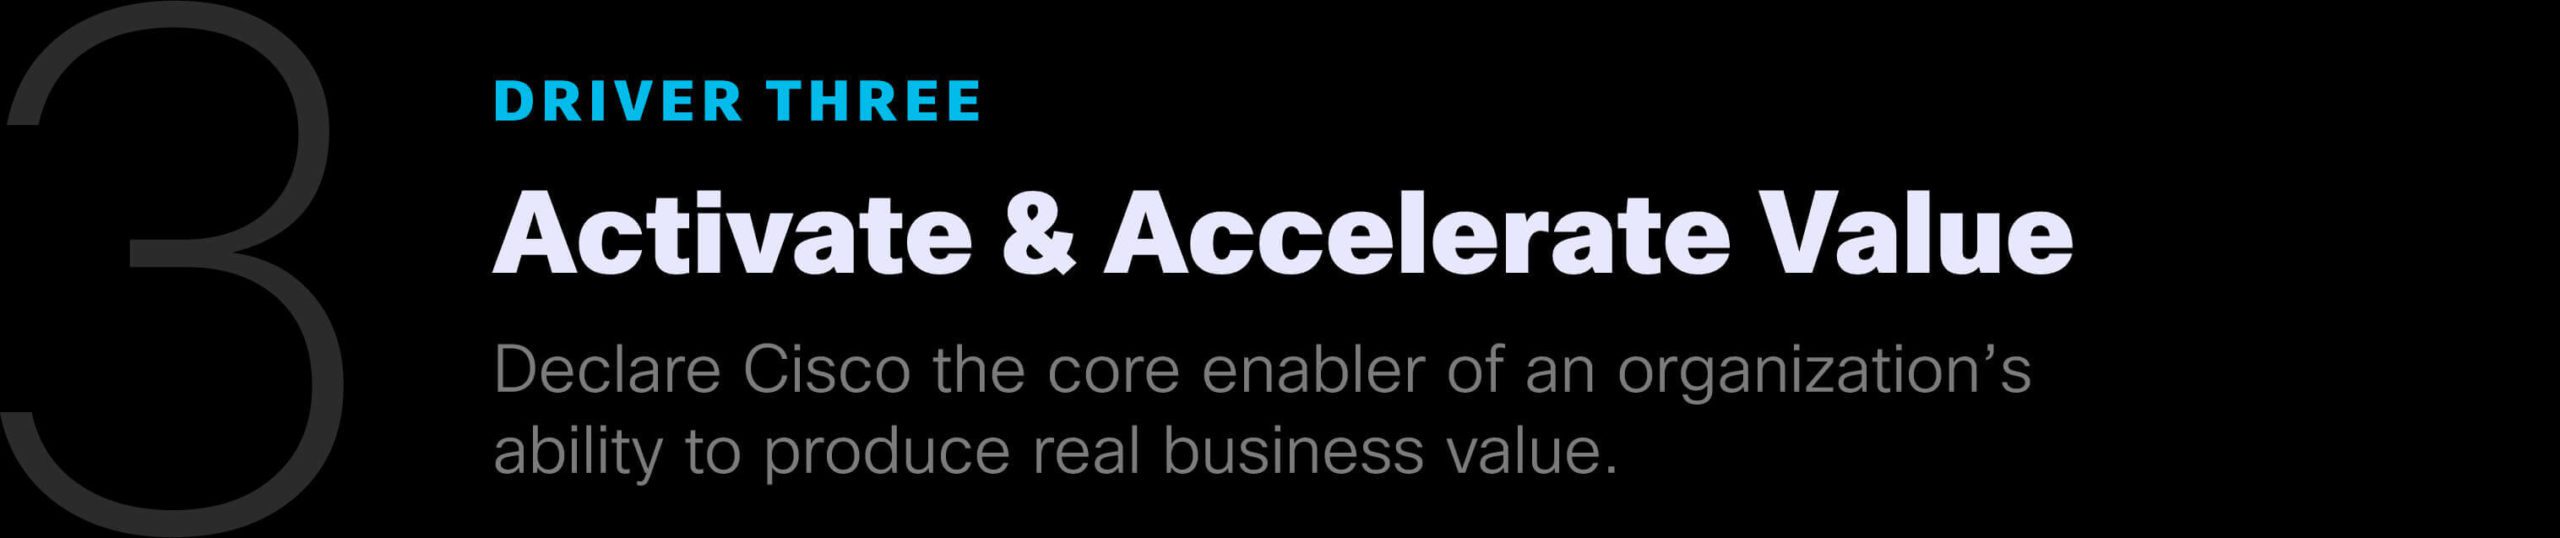 Driver Three: Activate & Accelerate Value. Declare Cisco the core enabler of an organization's ability to produce real business value.